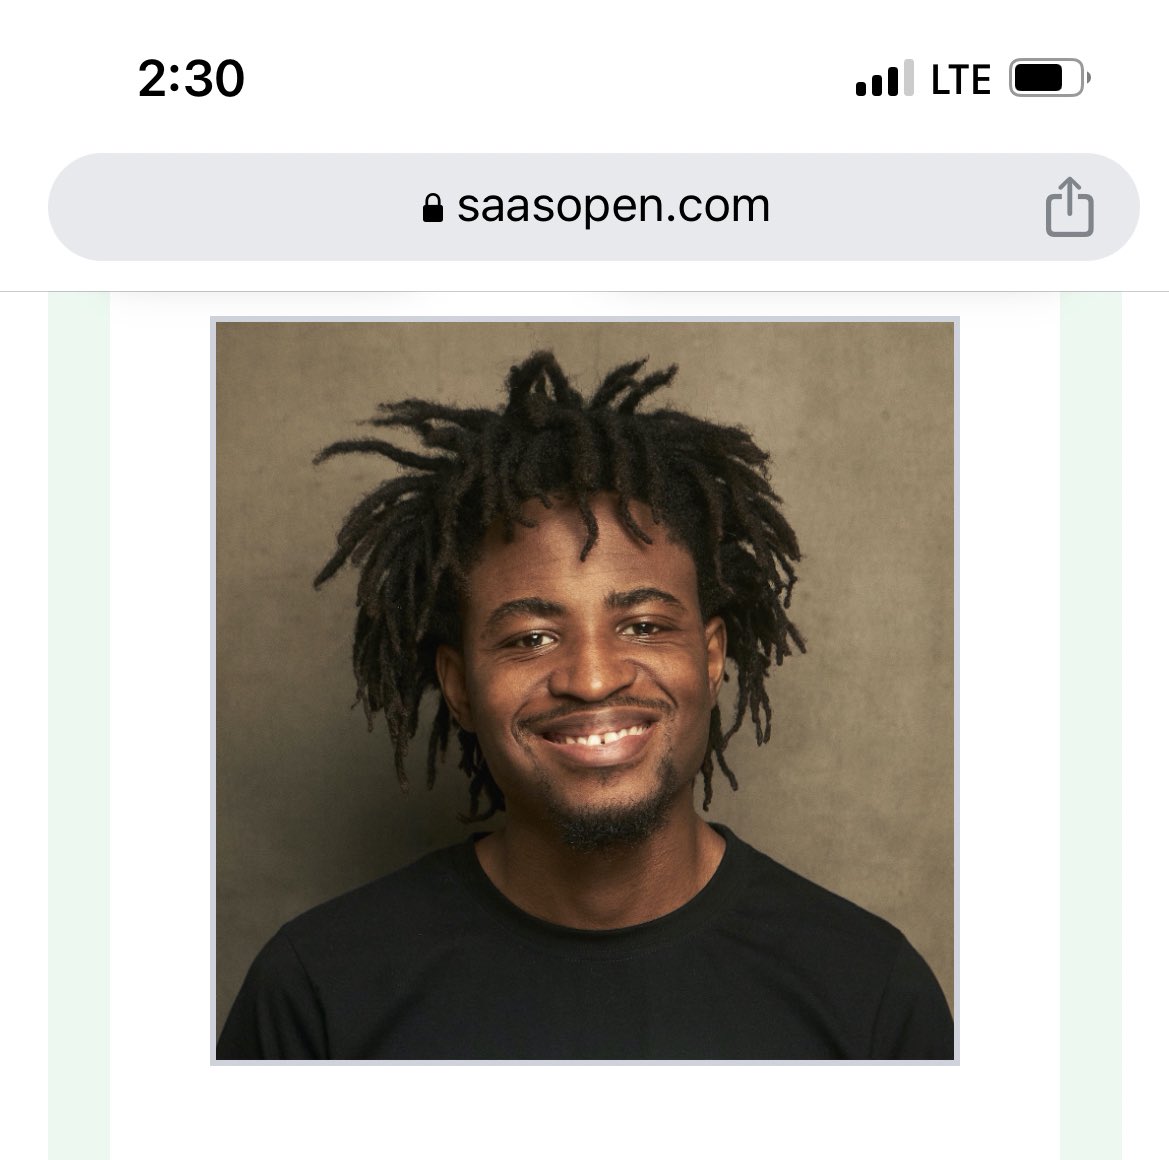 I’m pleased to announce that I’ll be speaking tomorrow at SaaSOpen, New York.

It’s my first time in the U.S. and I’m super excited and grateful for the opportunity to talk about @BeezopHQ on such a stage.